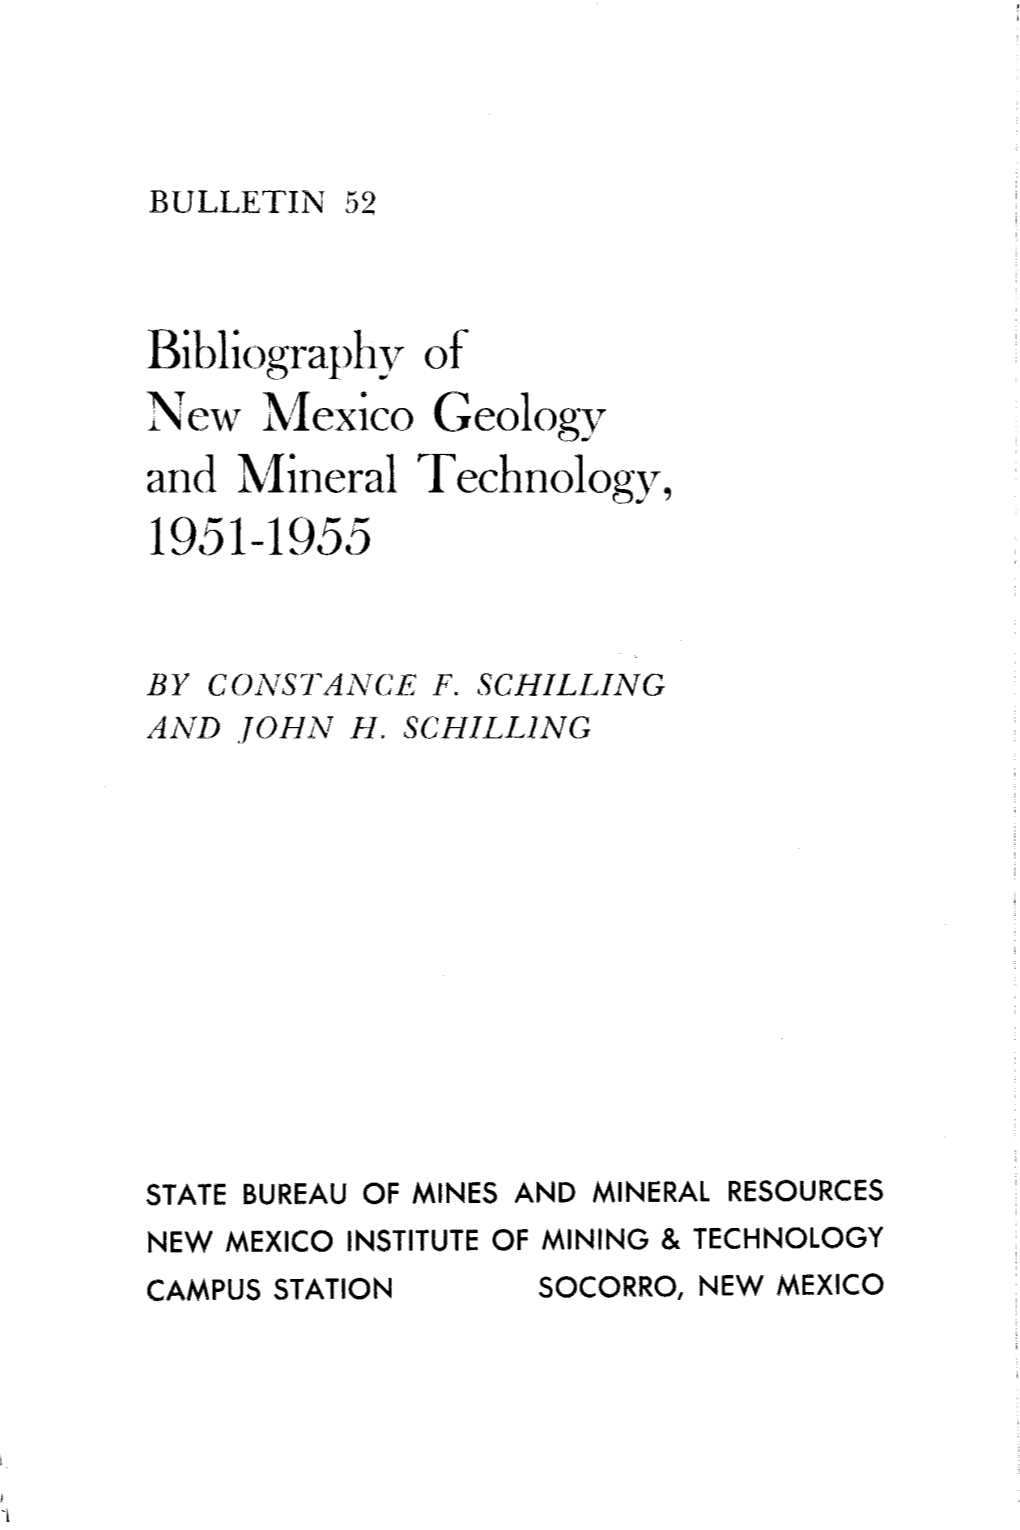 Bibliography of New Mexico Geology and Mineral Technology, 1951-1955